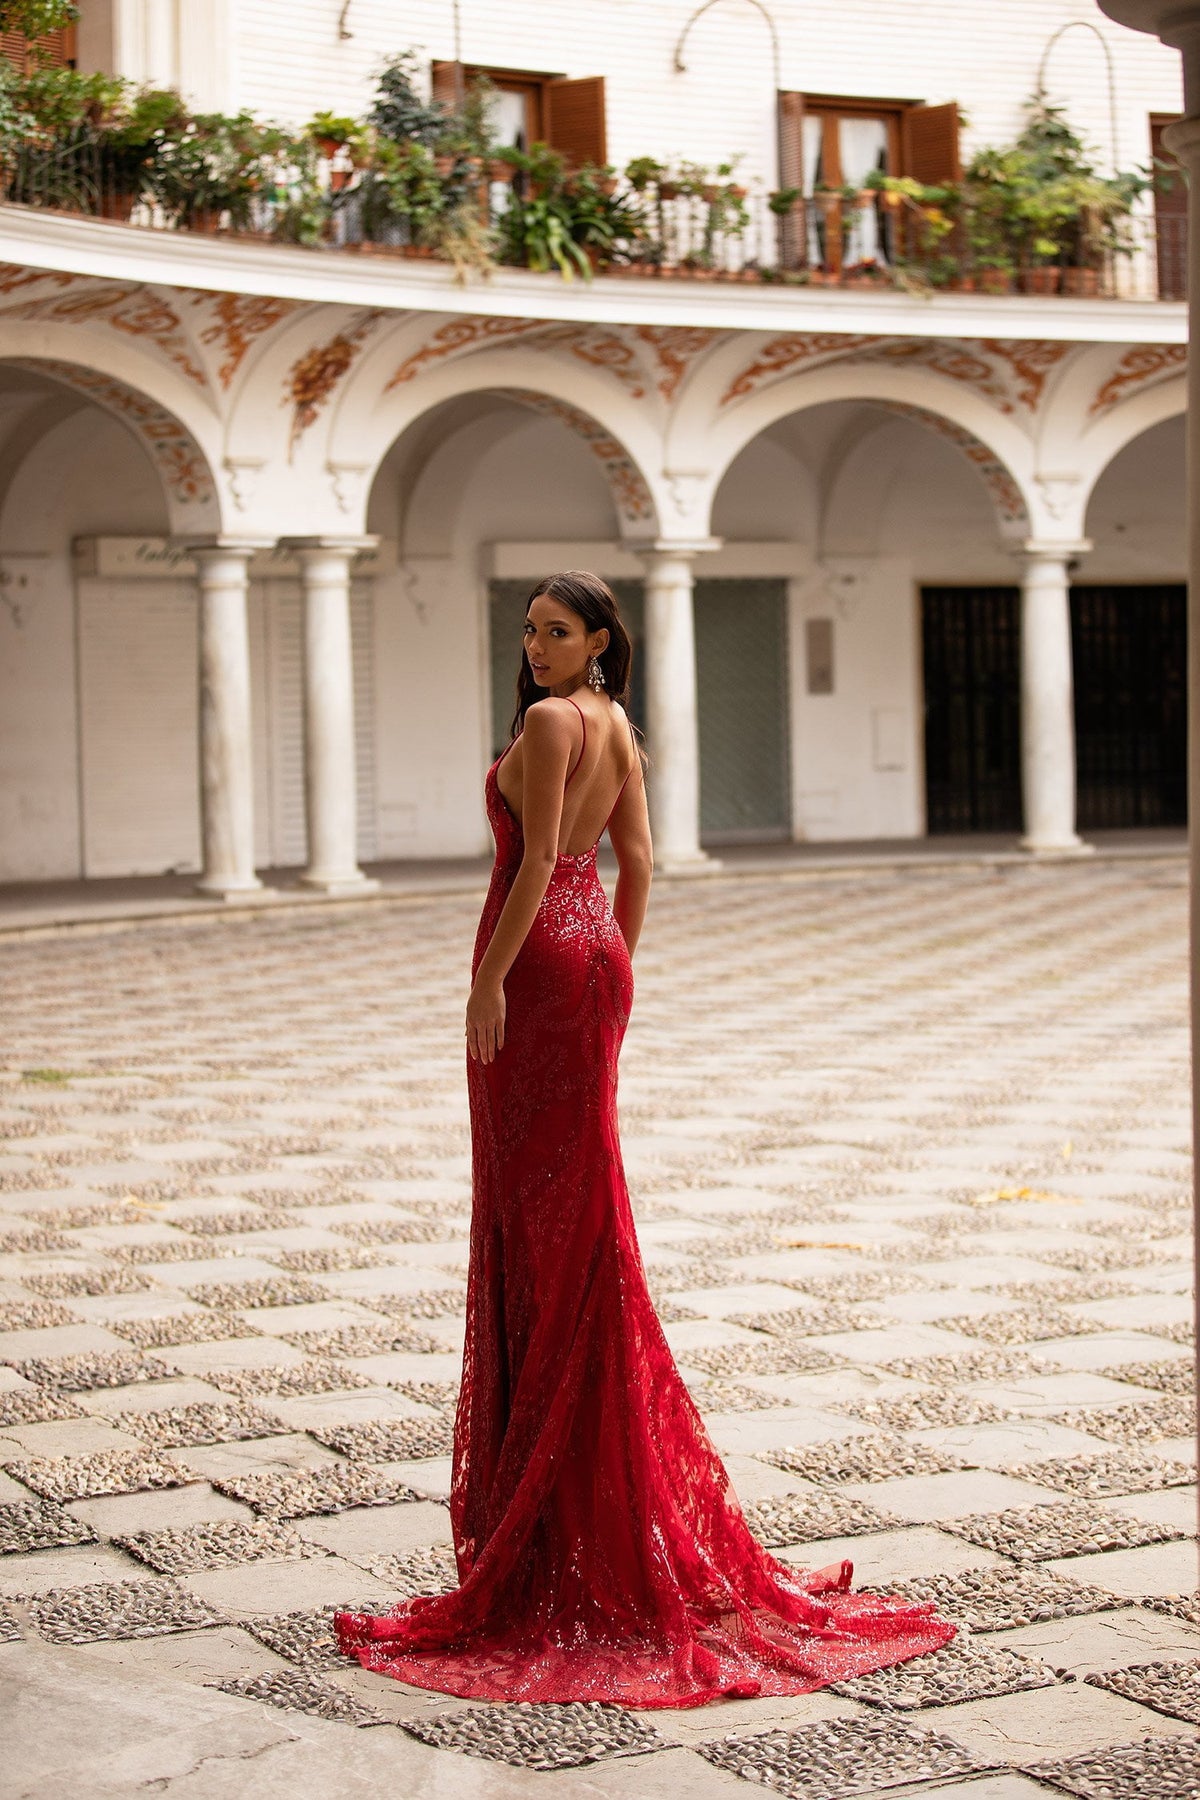 Rhinestone Strap Backless Dress Red - Luxe Party Dresses and Luxe